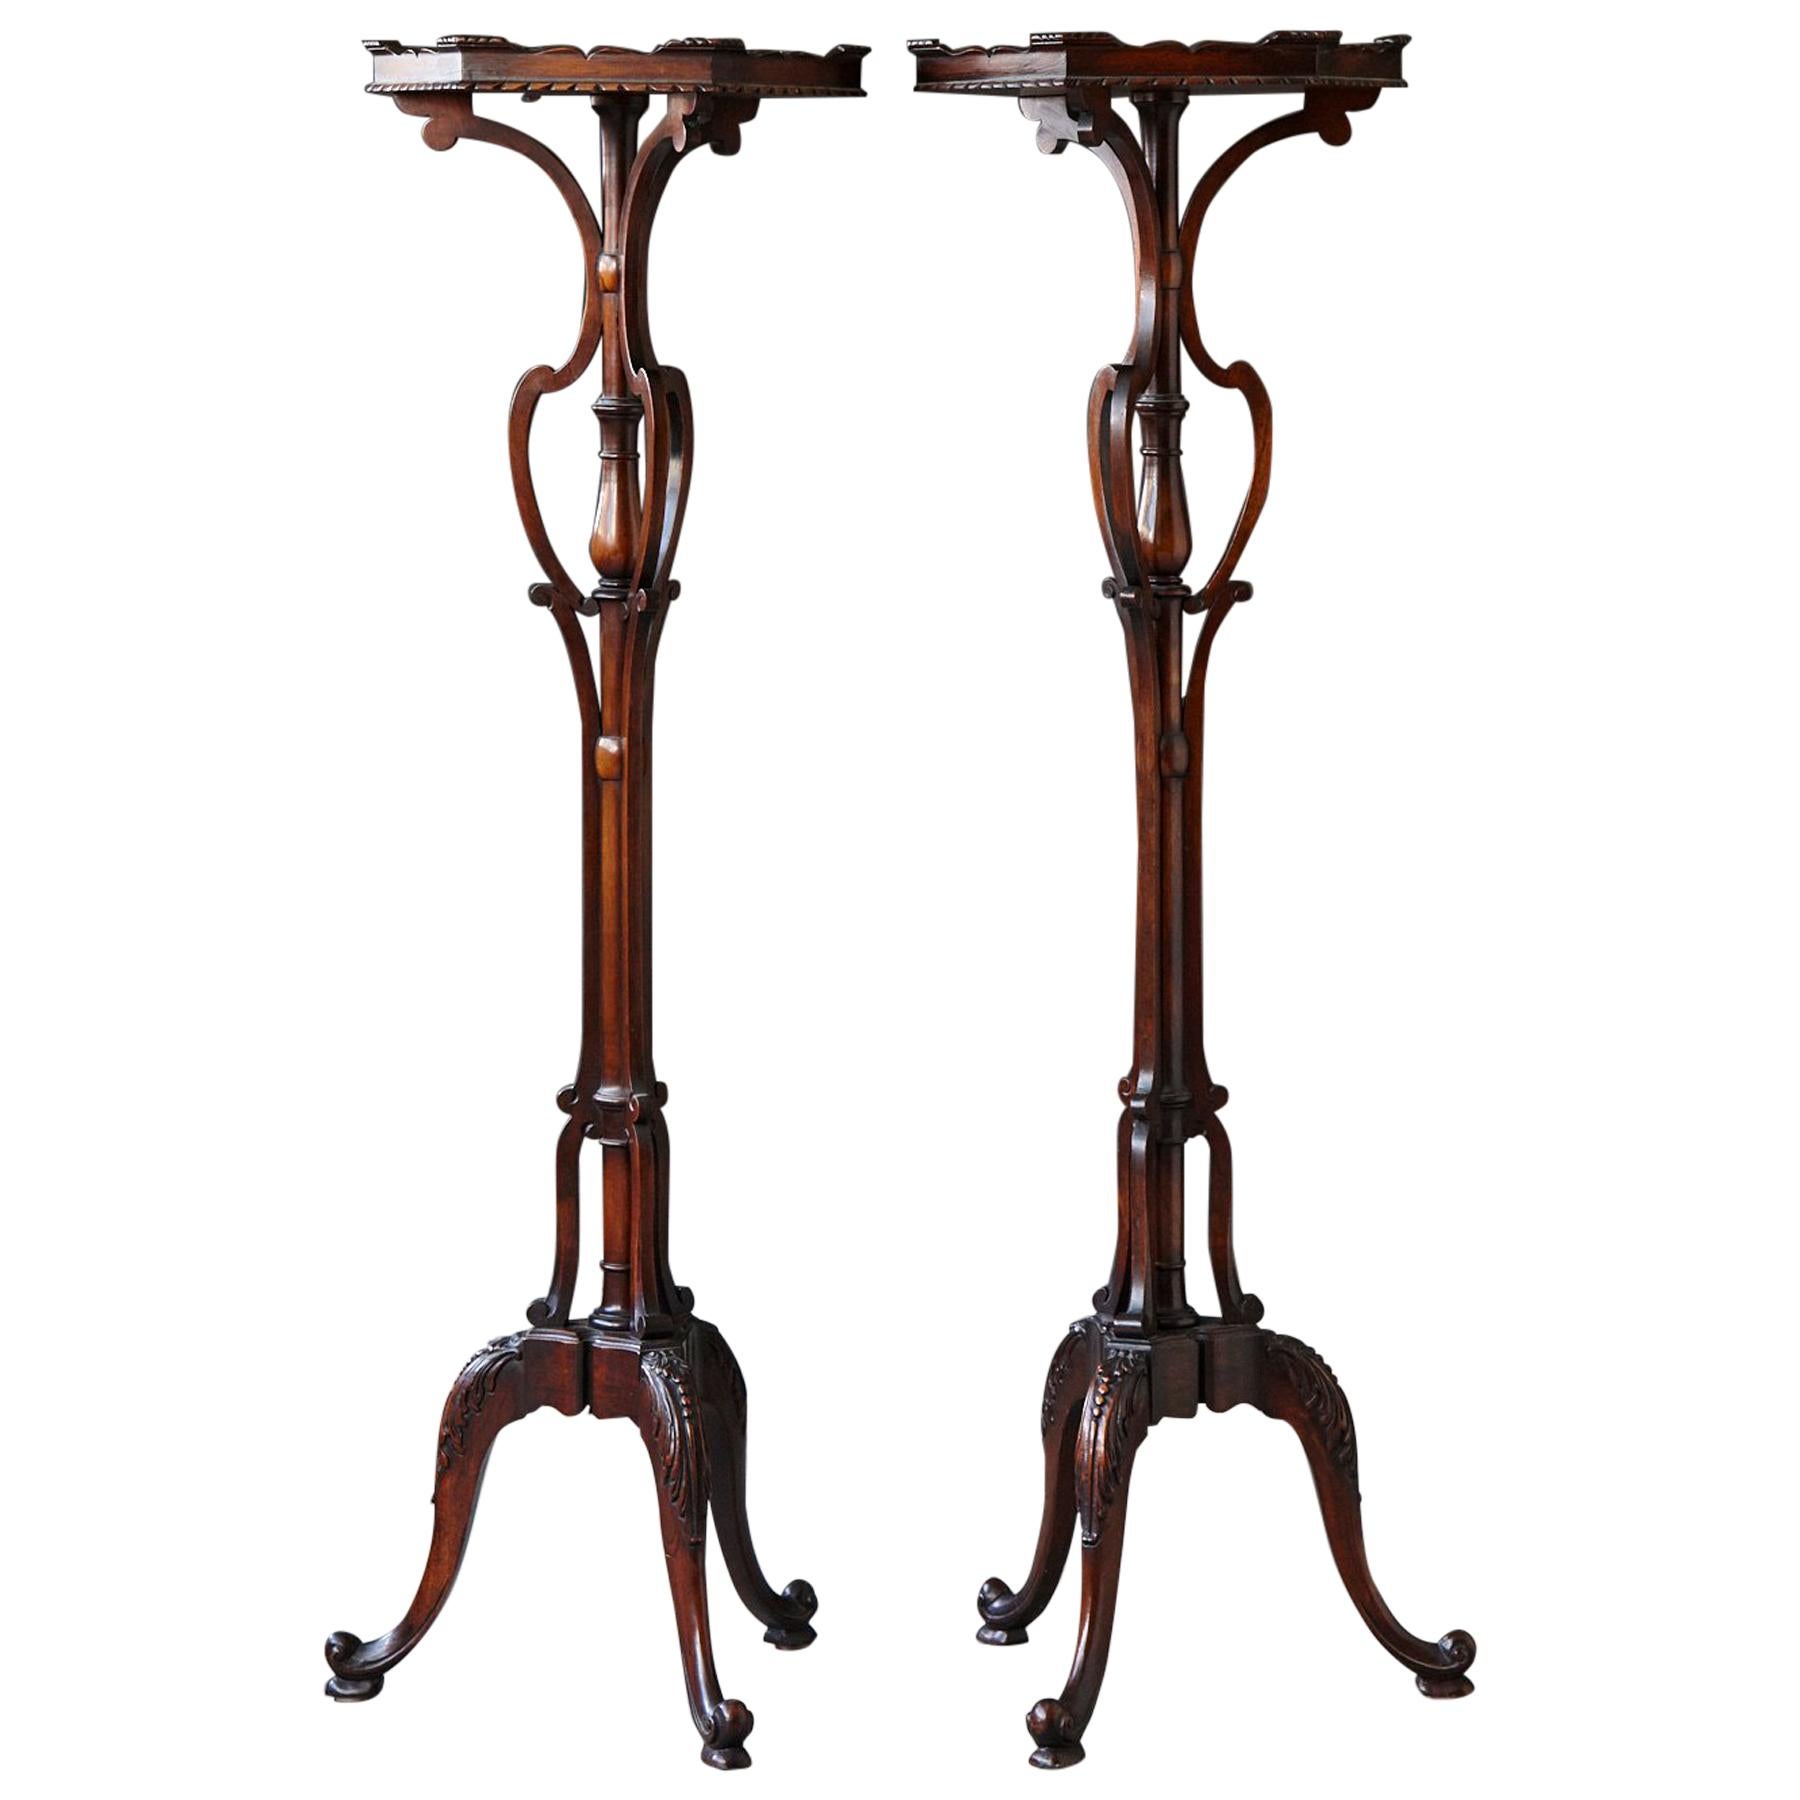 Pair of Victorian Style Carved Mahogany Plant Pedestals or Stands